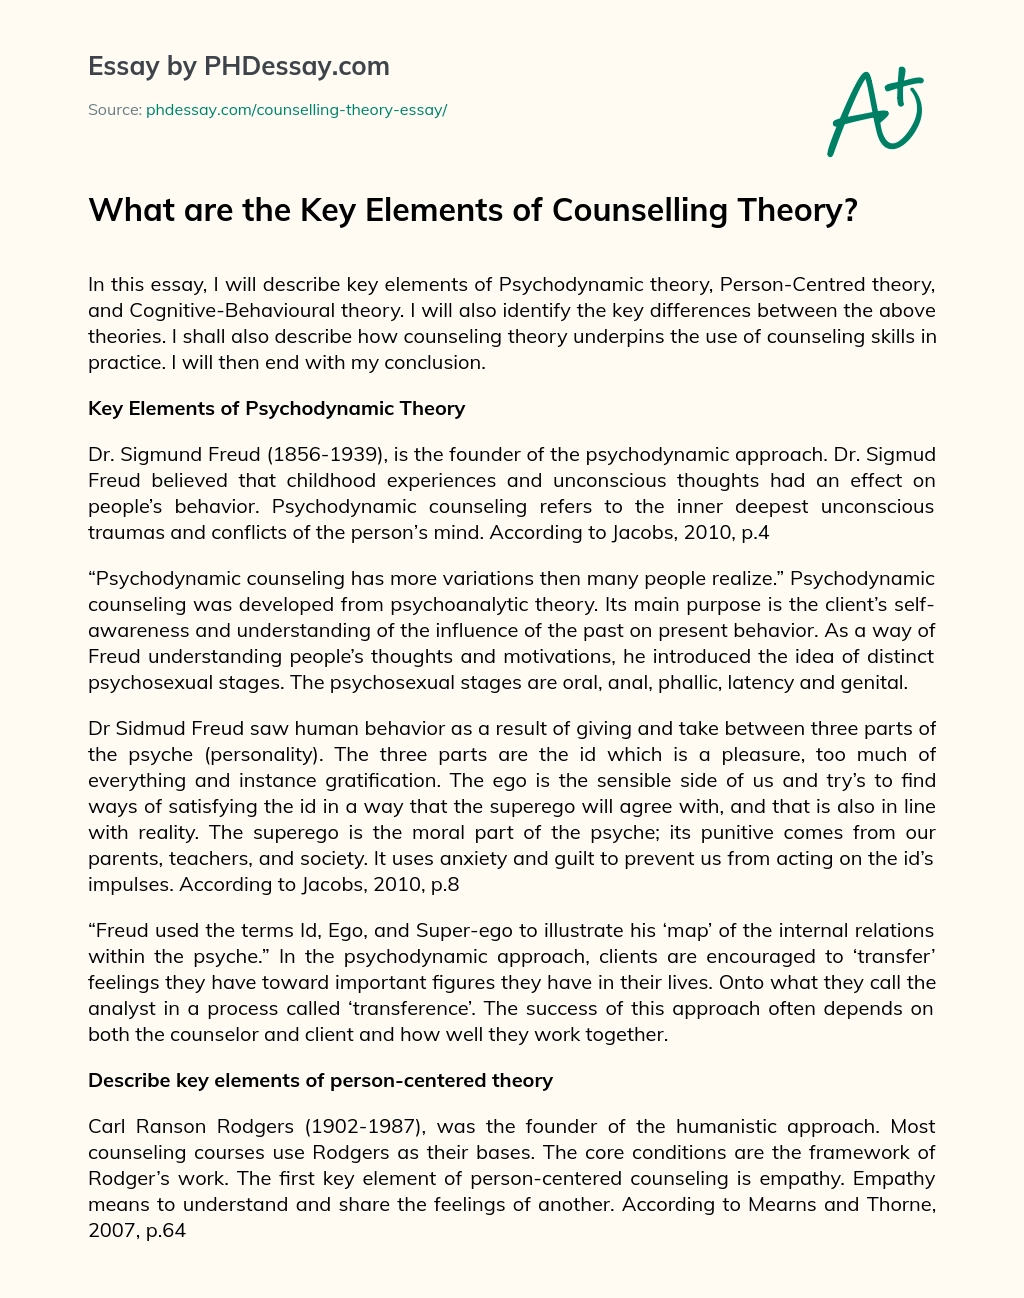 What are the Key Elements of Counselling Theory? essay